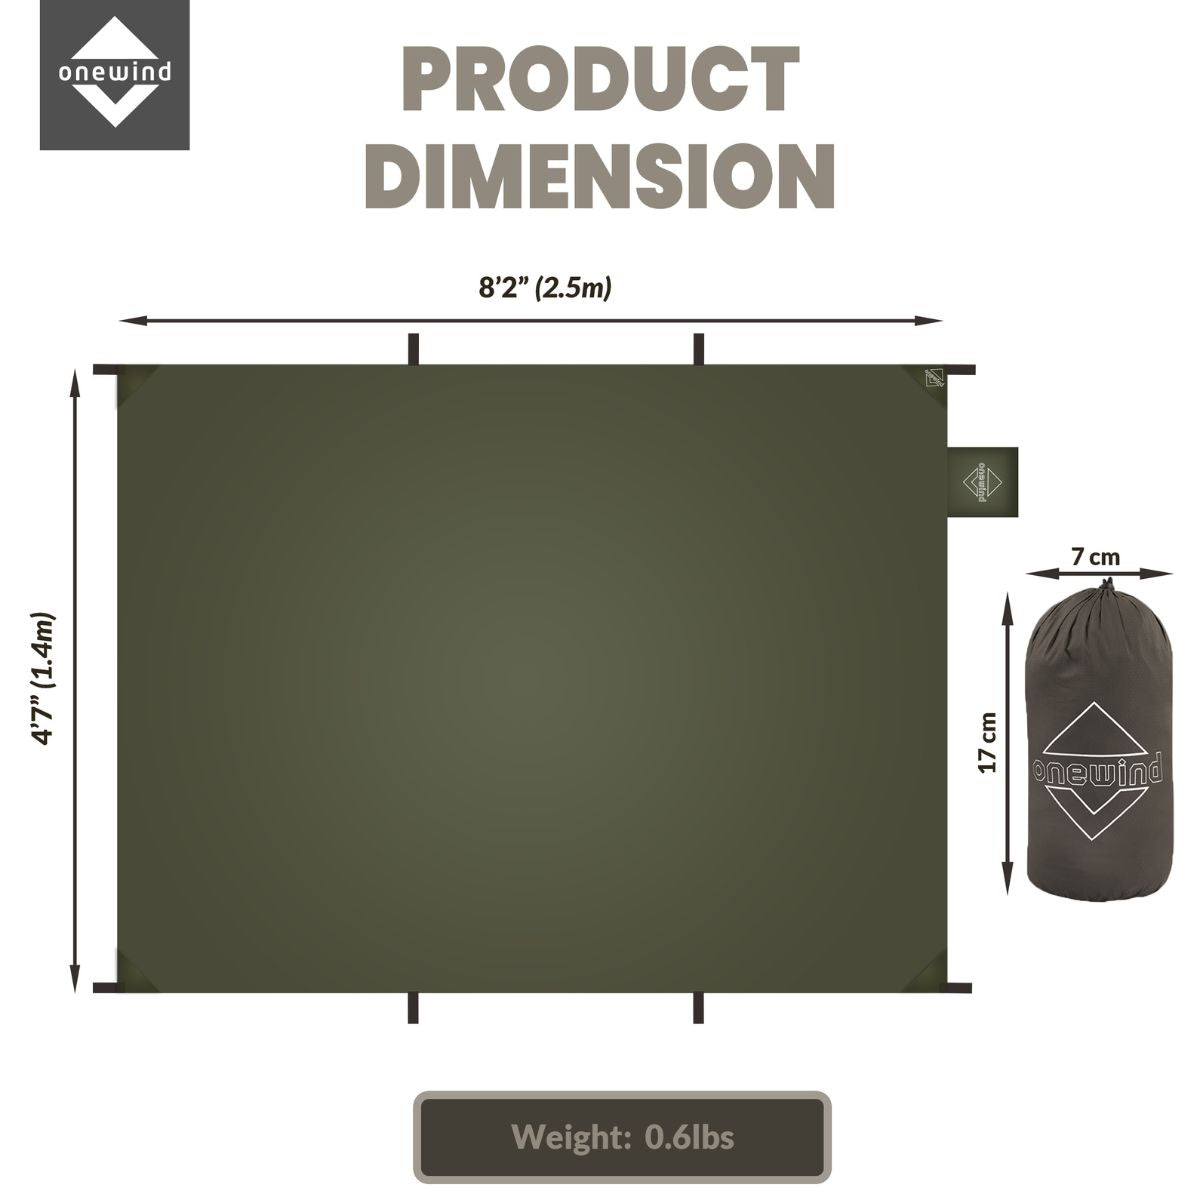 Product Dimension | Onewind Outdoor